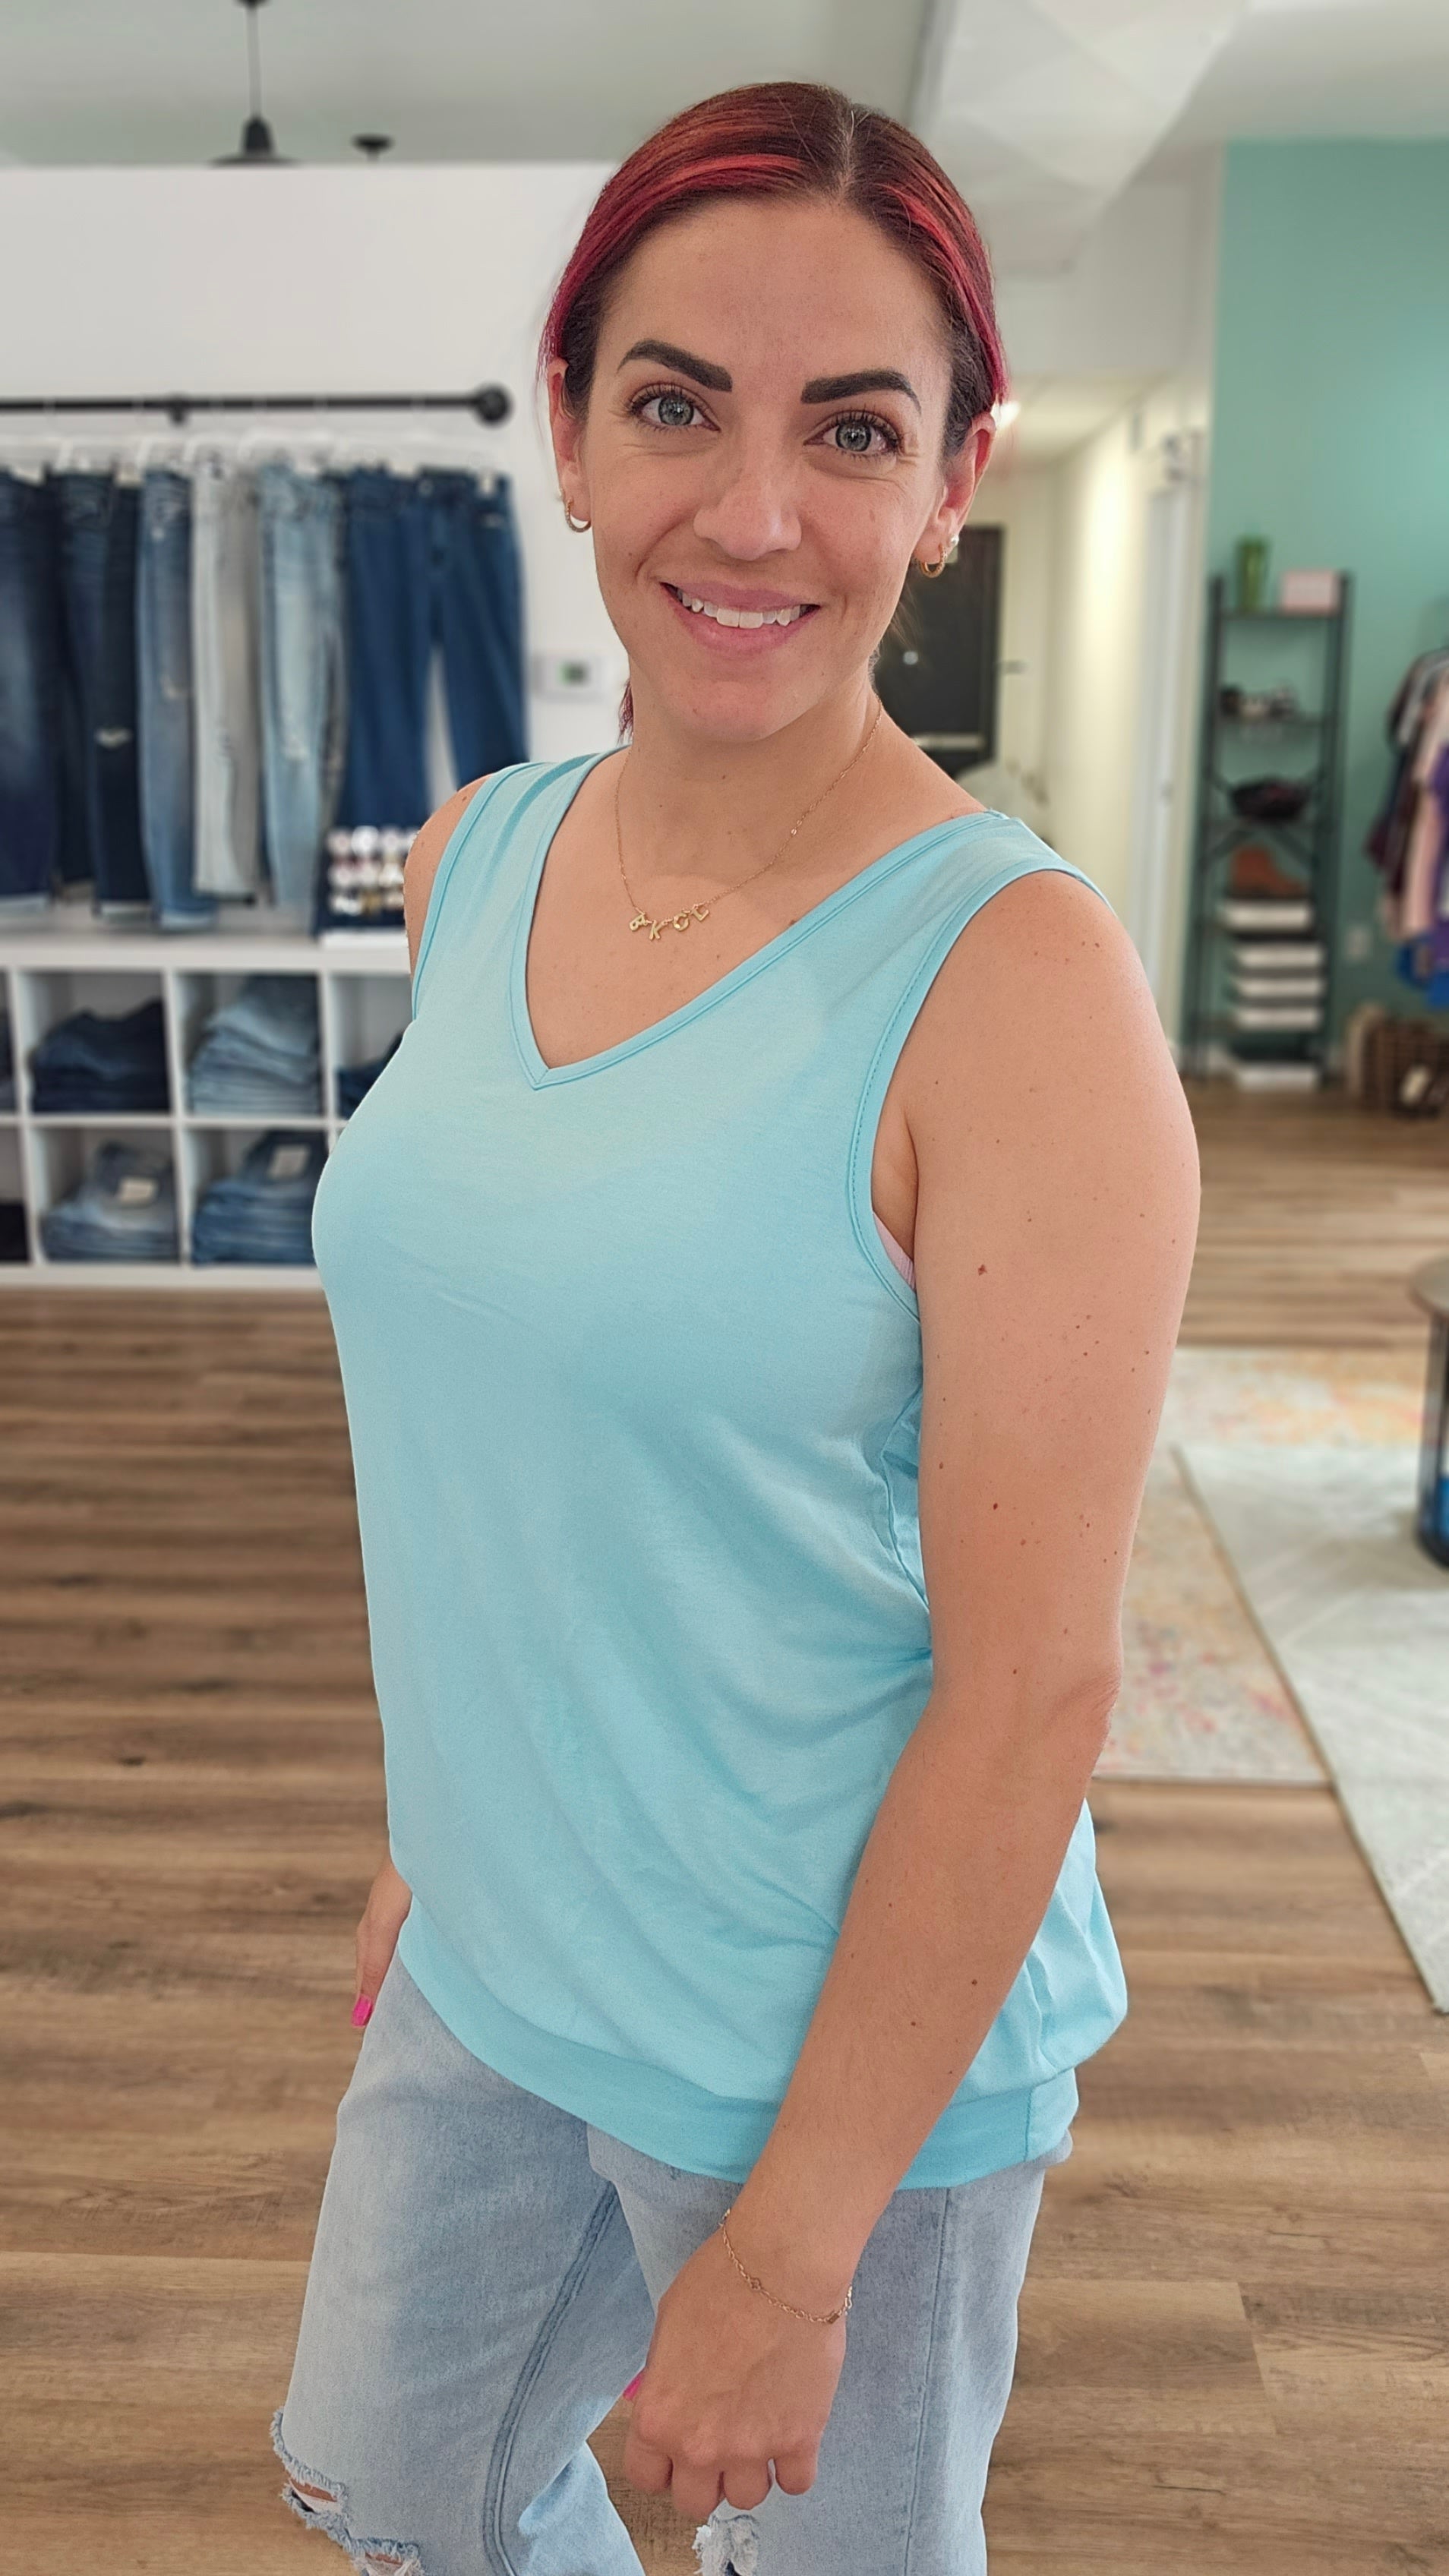 Shop Michele Banded Bottom Tank-Shirts & Tops at Ruby Joy Boutique, a Women's Clothing Store in Pickerington, Ohio